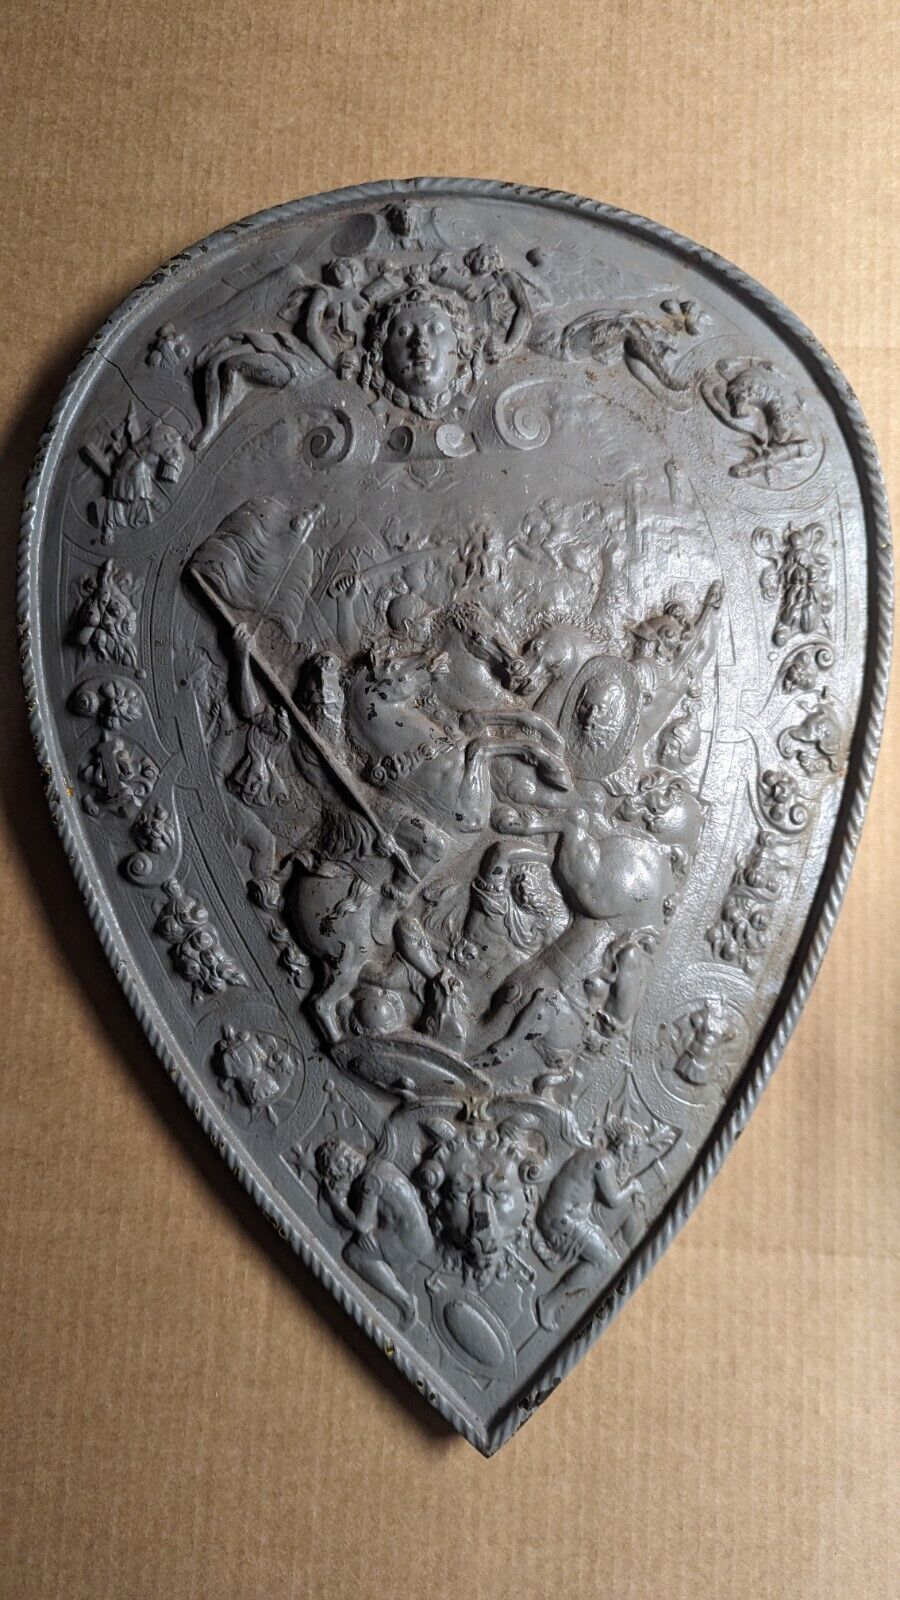 HEAVY Vintage Cast Iron Shield With Battle Scenes Mid - CRACKED LOOK